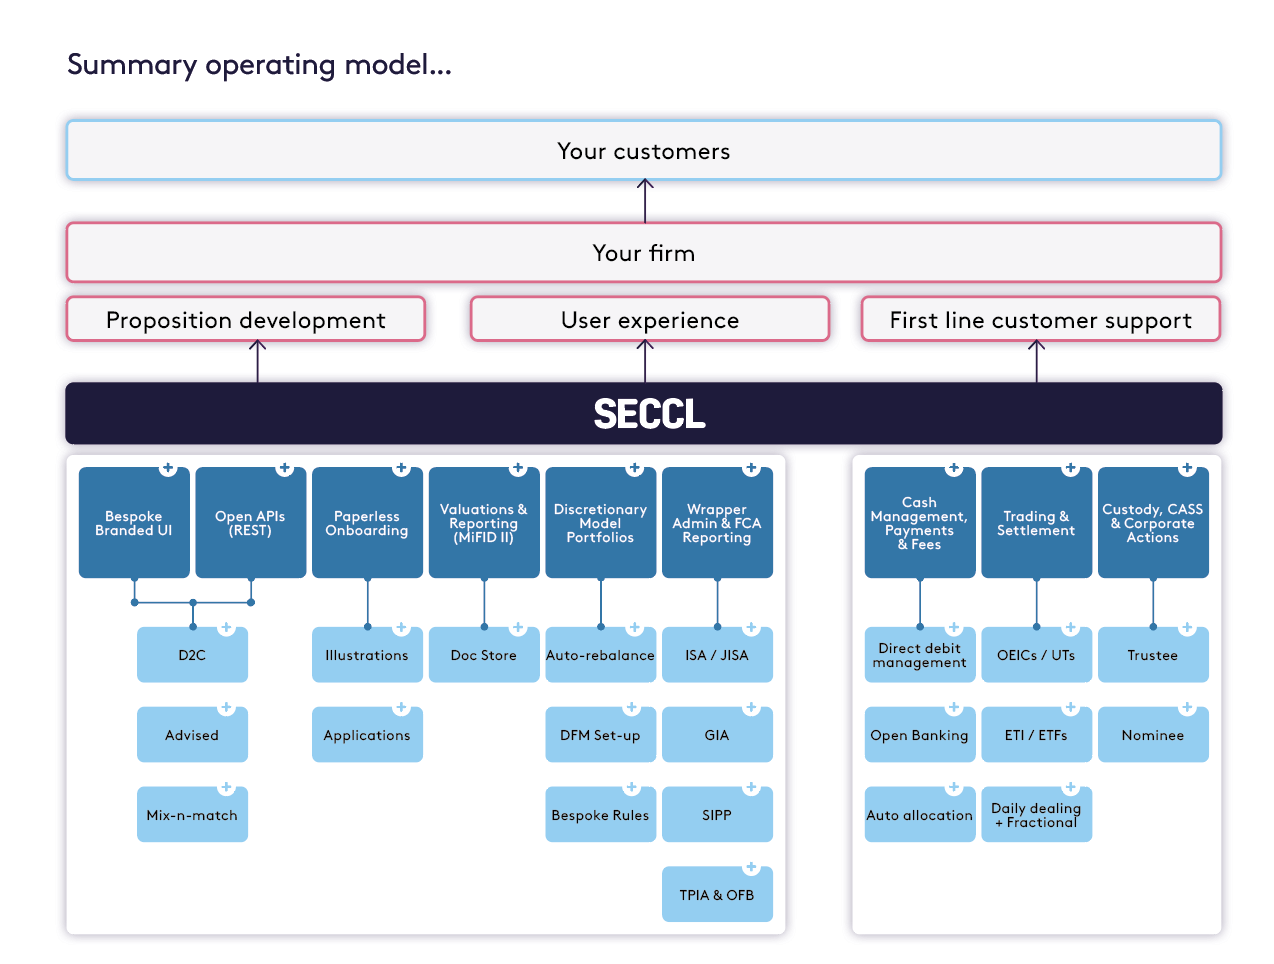 Our operating model